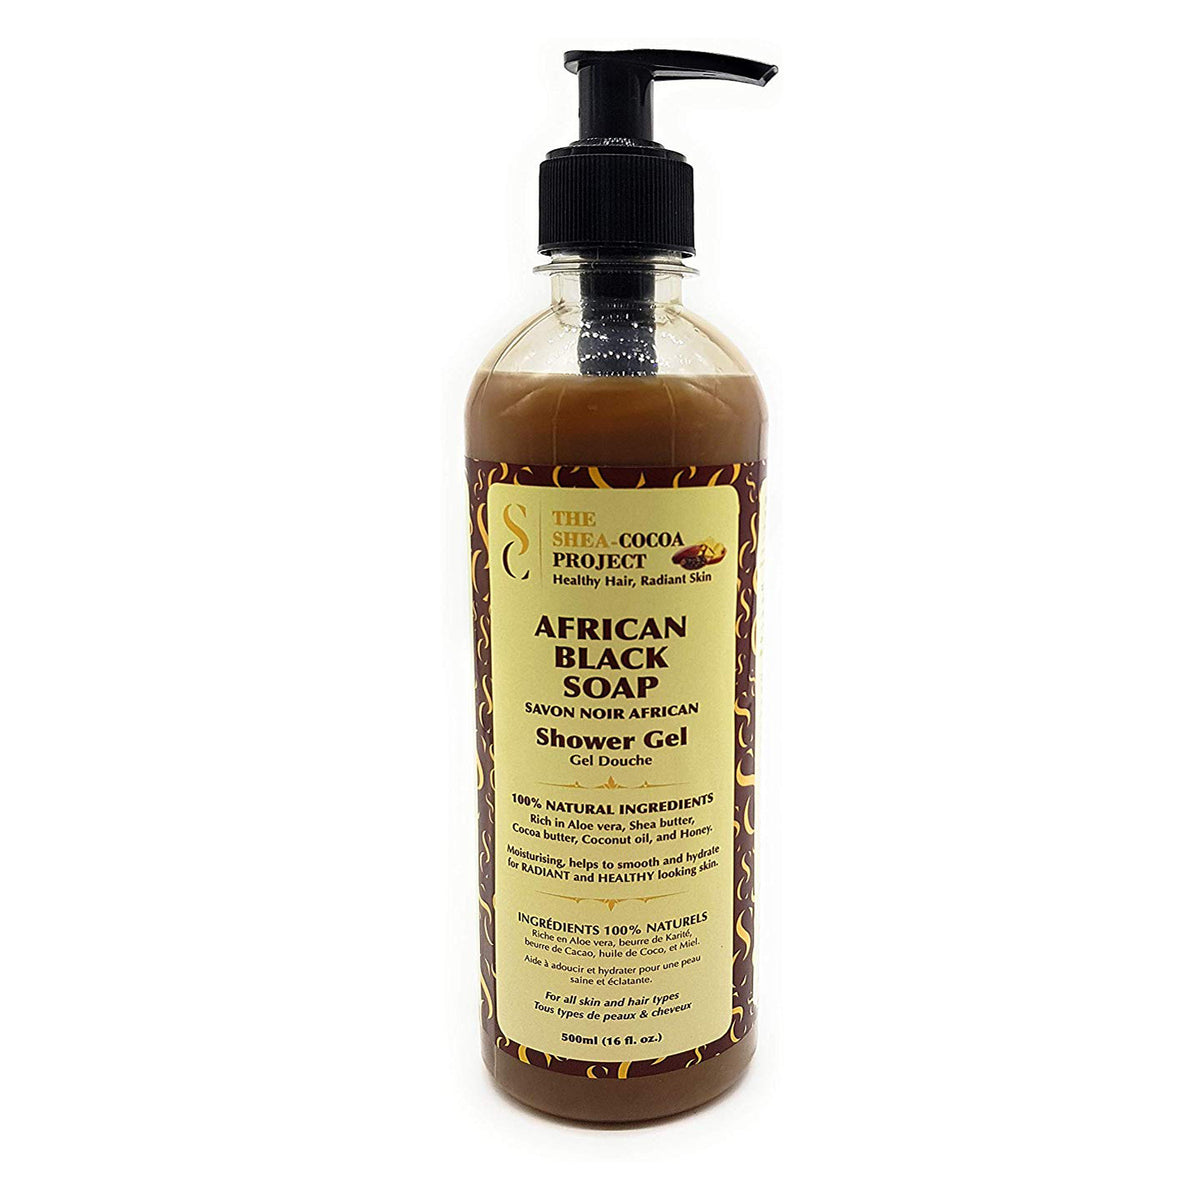 Shea Cocoa Project - African Black Soap - 500ml